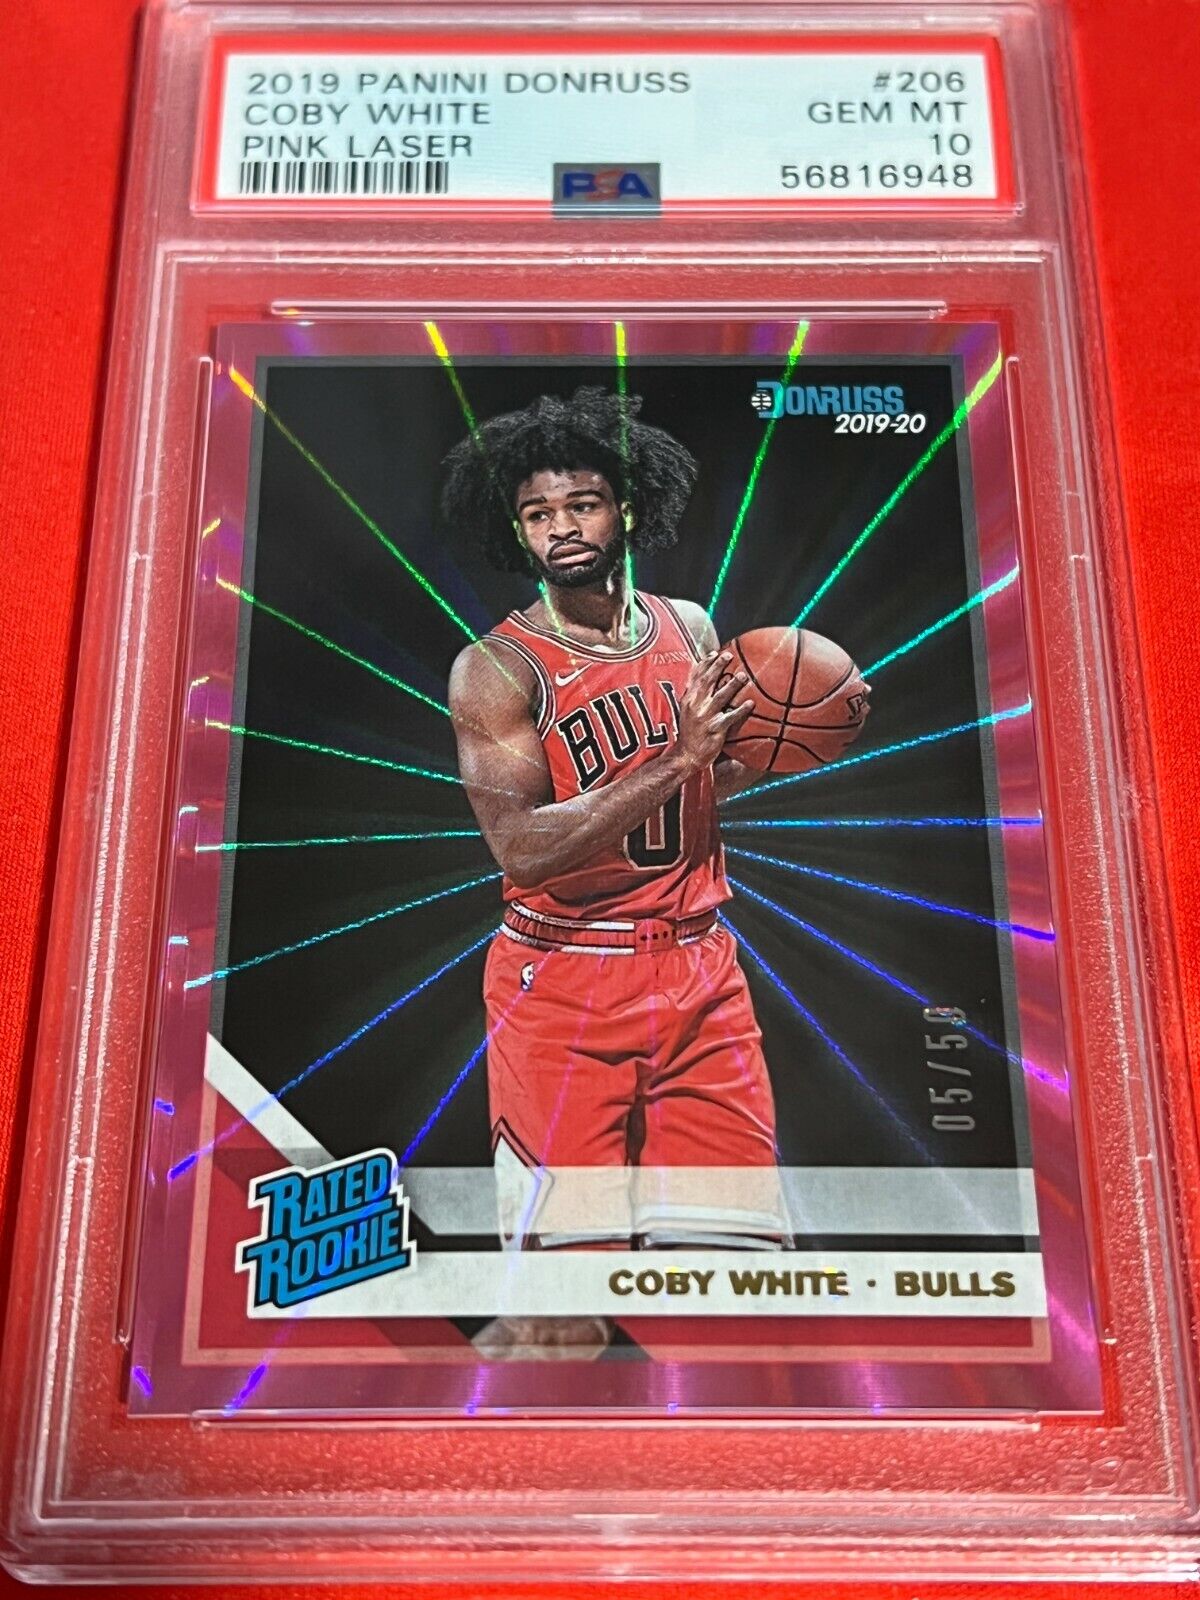 2019 Panini Donruss COBY WHITE RC Rated Rookie Pink Laser PSA 10 /50